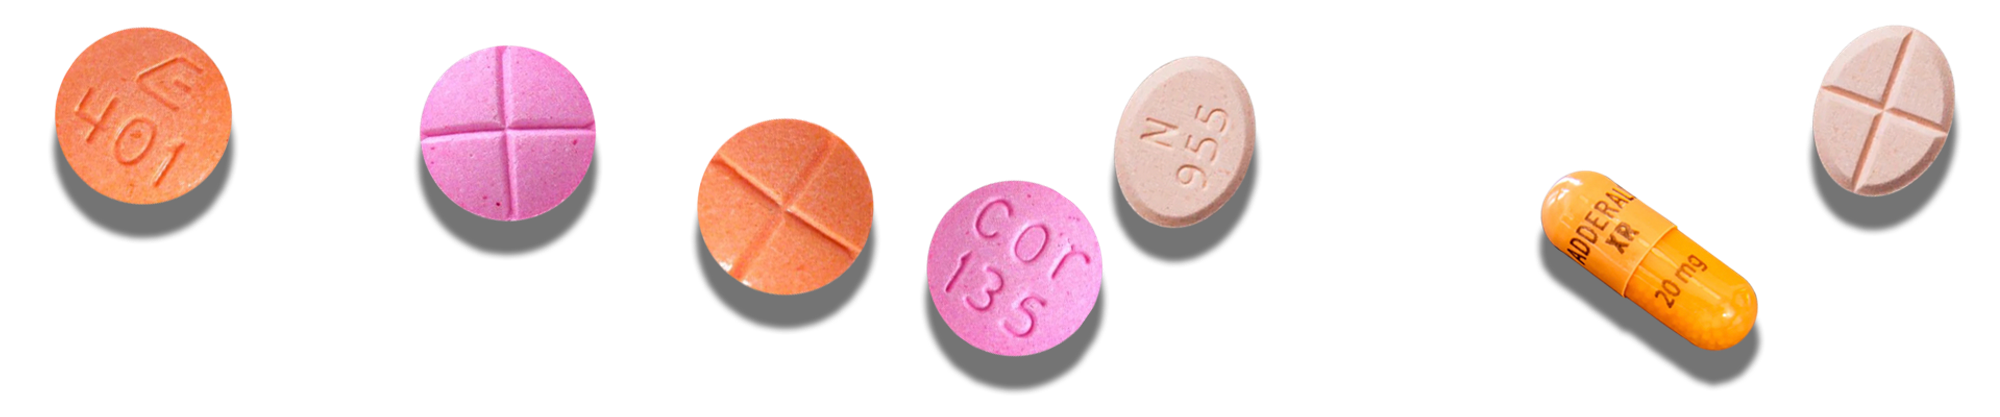 Adderall pills of different colors and sizes arranged in a pattern